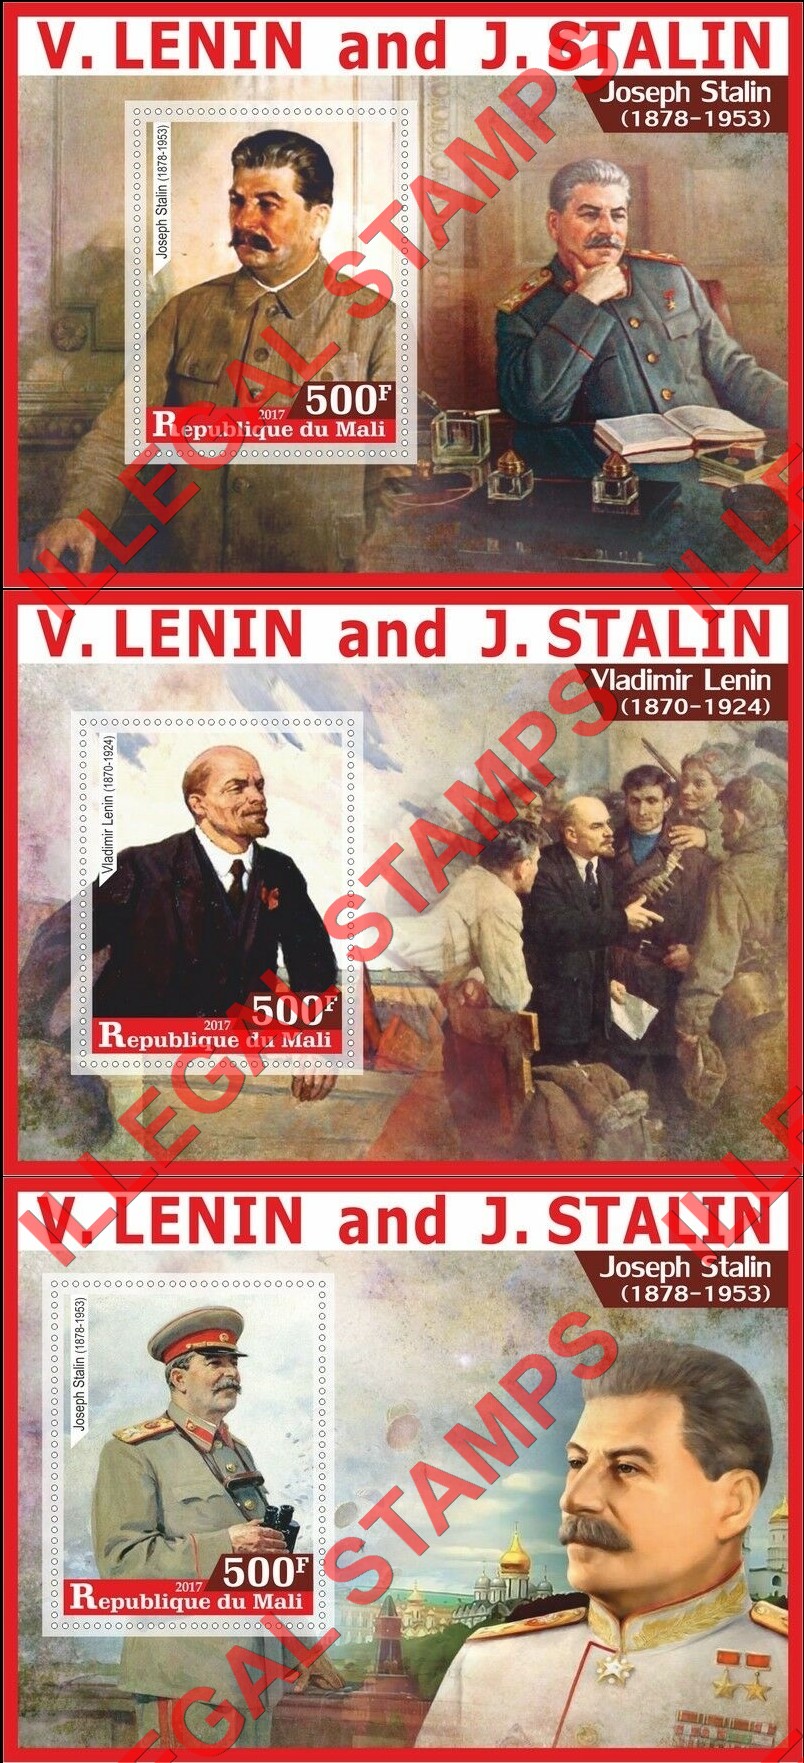 Mali 2017 Lenin and Stalin Illegal Stamp Souvenir Sheets of 1 (Part 1)